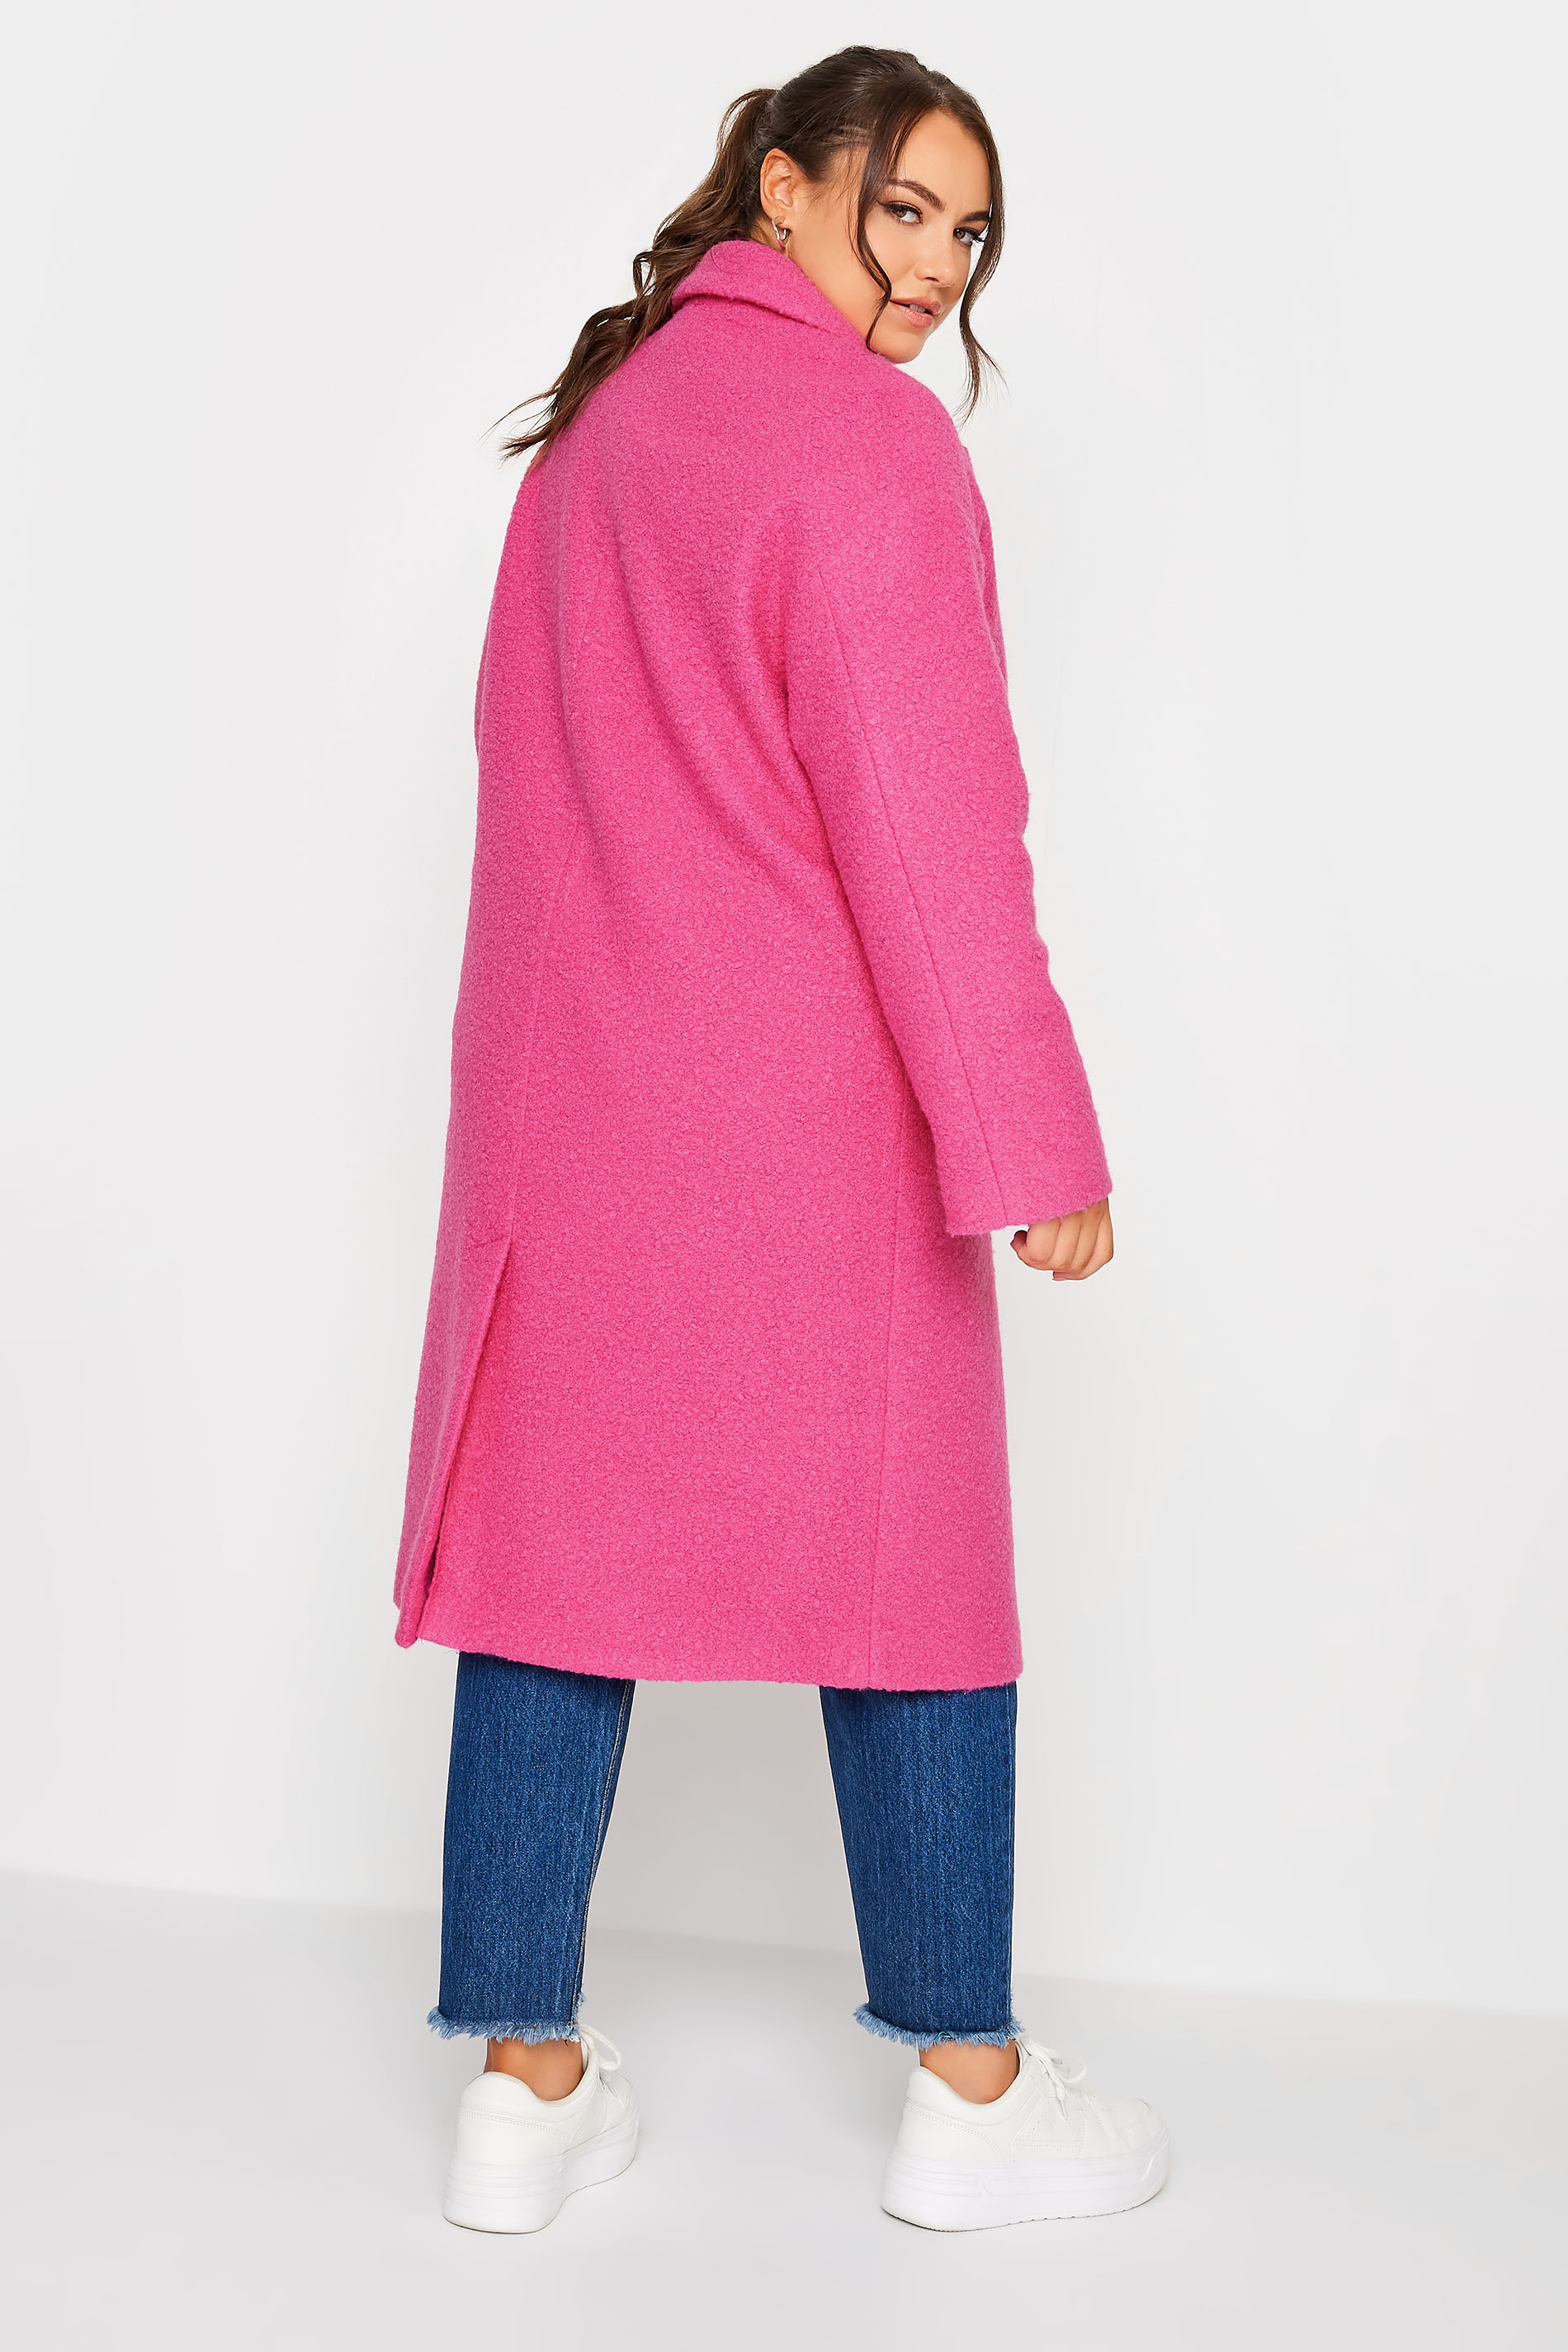 YOURS Plus Size Pink Boucle Coat | Yours Clothing